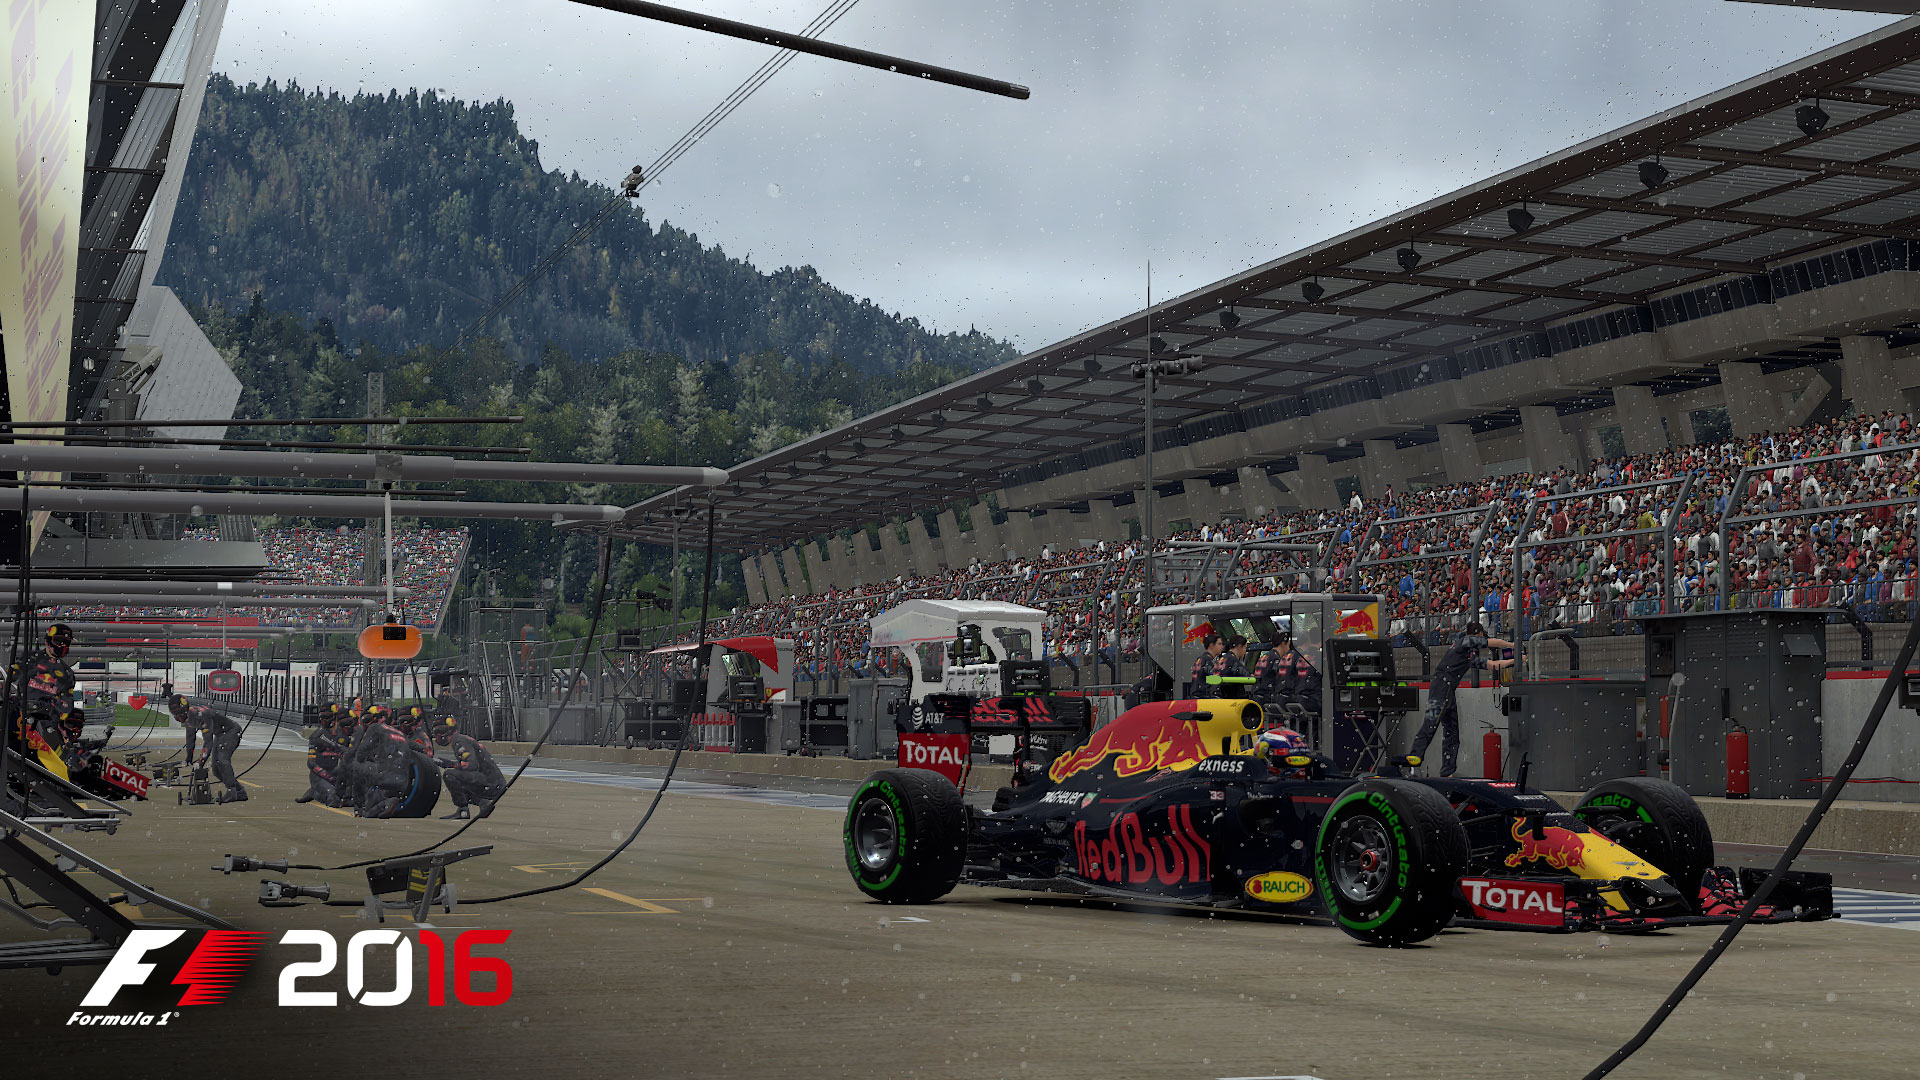 F1 2016 Review Just Like The Real Thing Except Not Boring Ars Technica